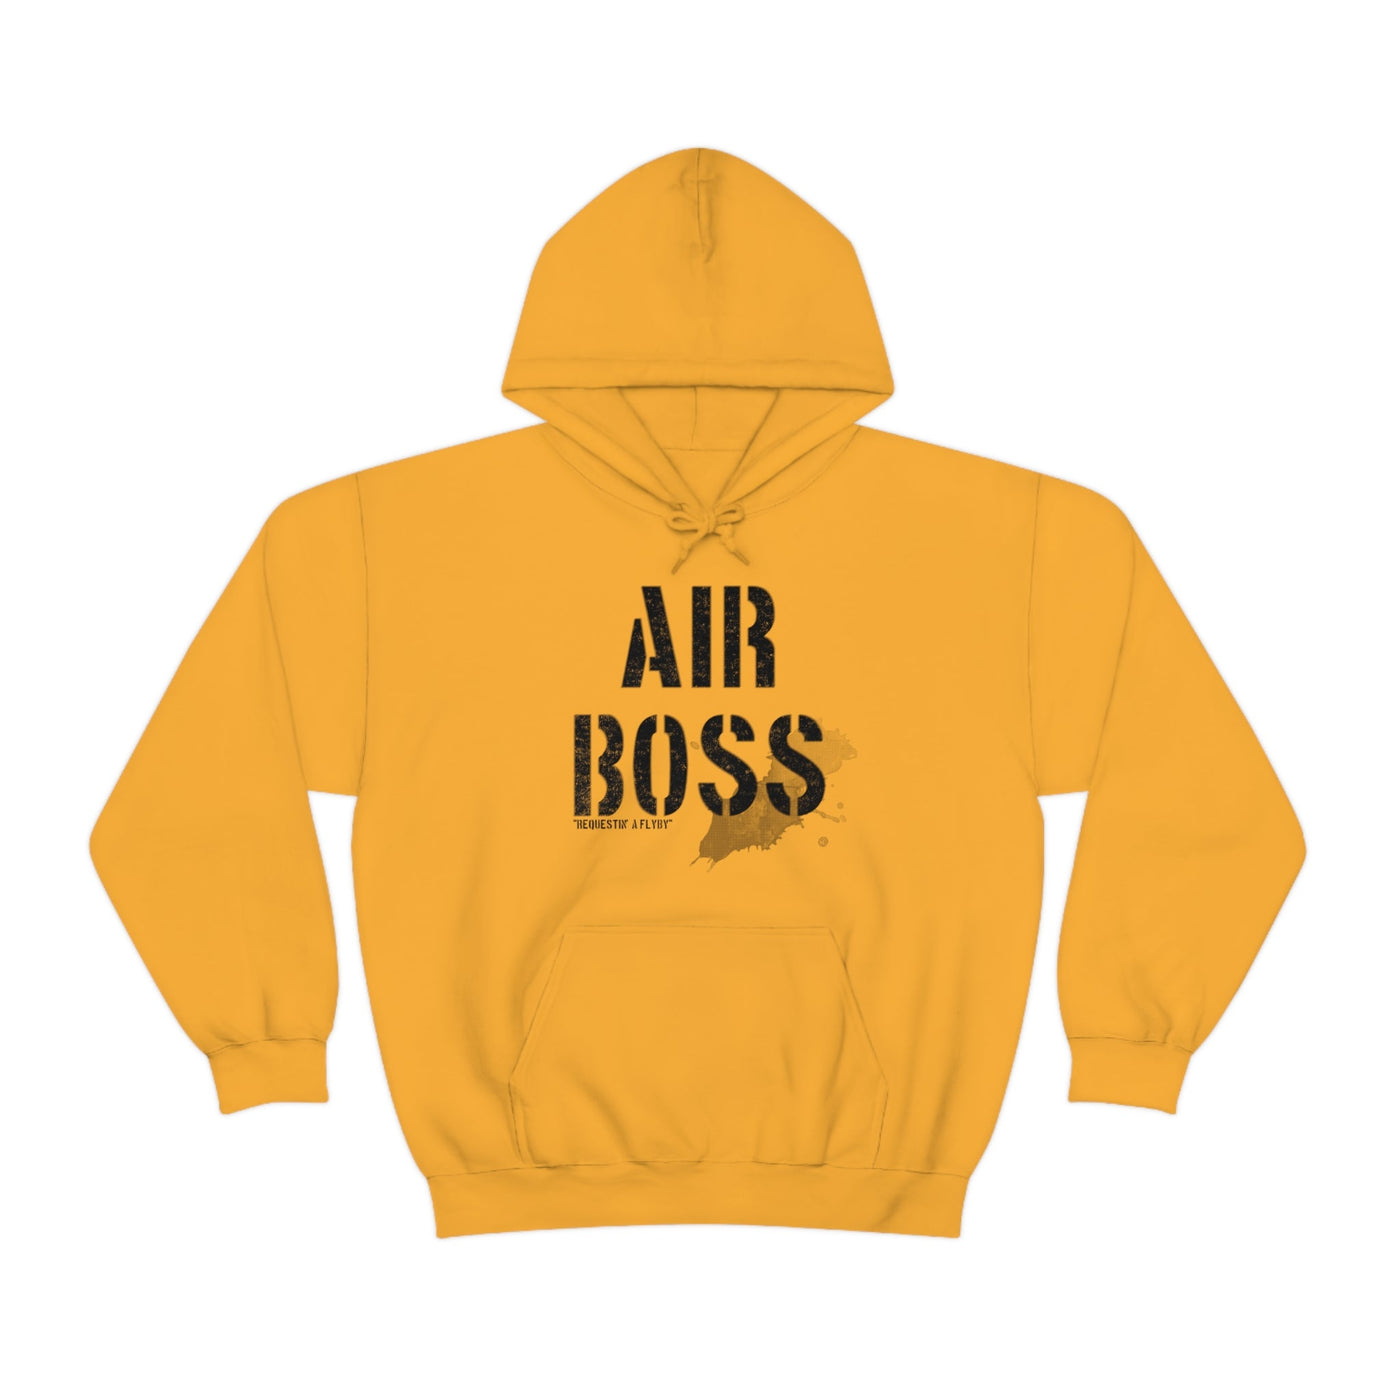 AIR BOSS "Requesting a Flyby" with coffee stain effect | Top Gun Hoodie